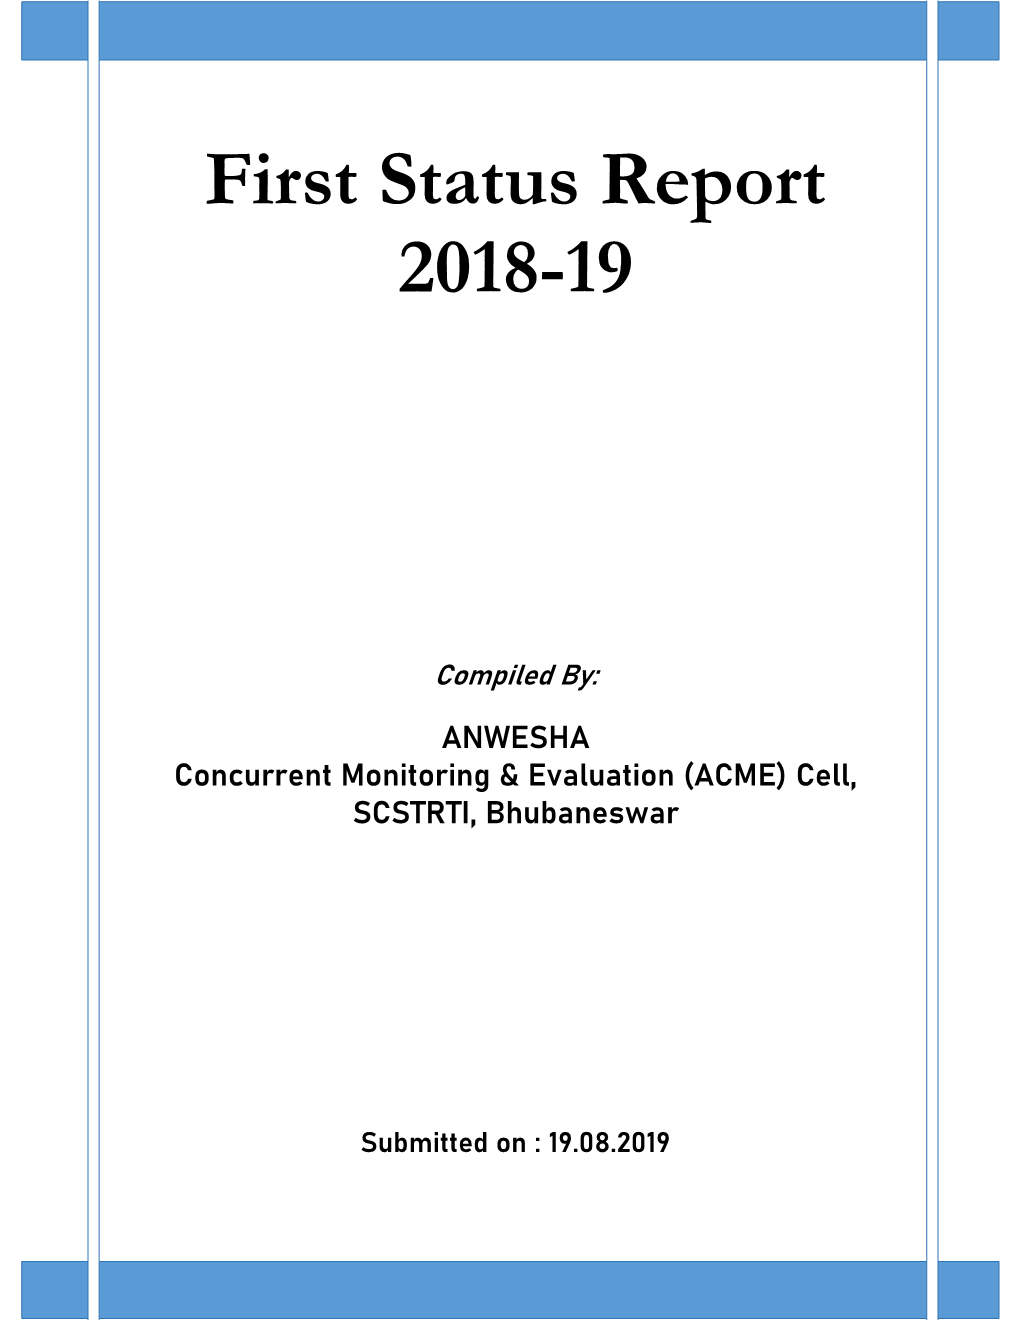 First Status Report 2018-19